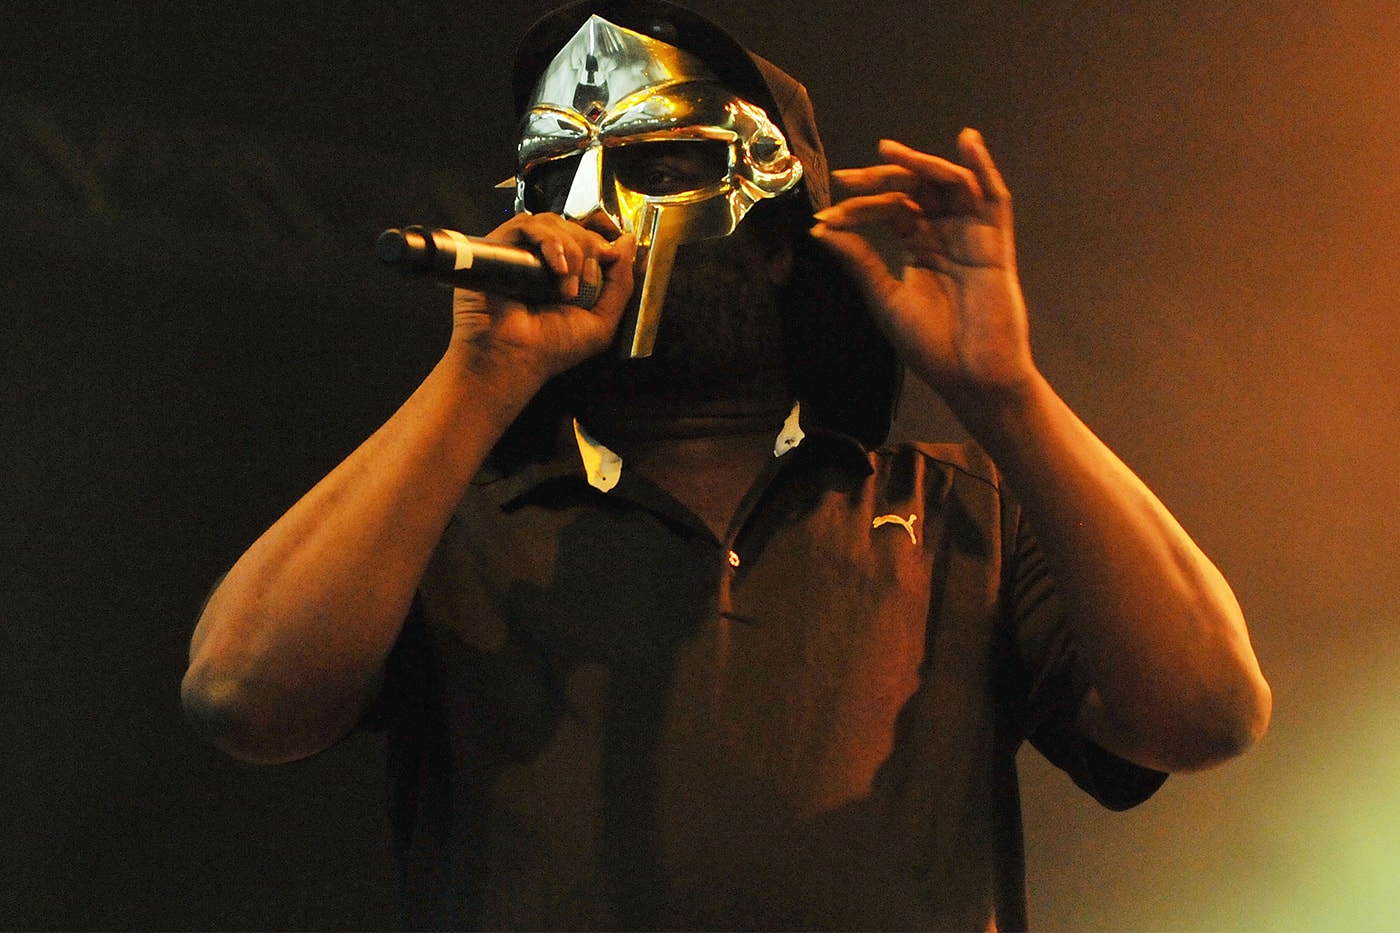 S.H. Fernando Jr MF DOOM Biography Announcement The Chronicles of Doom: Unraveling Rap’s Masked Iconoclast